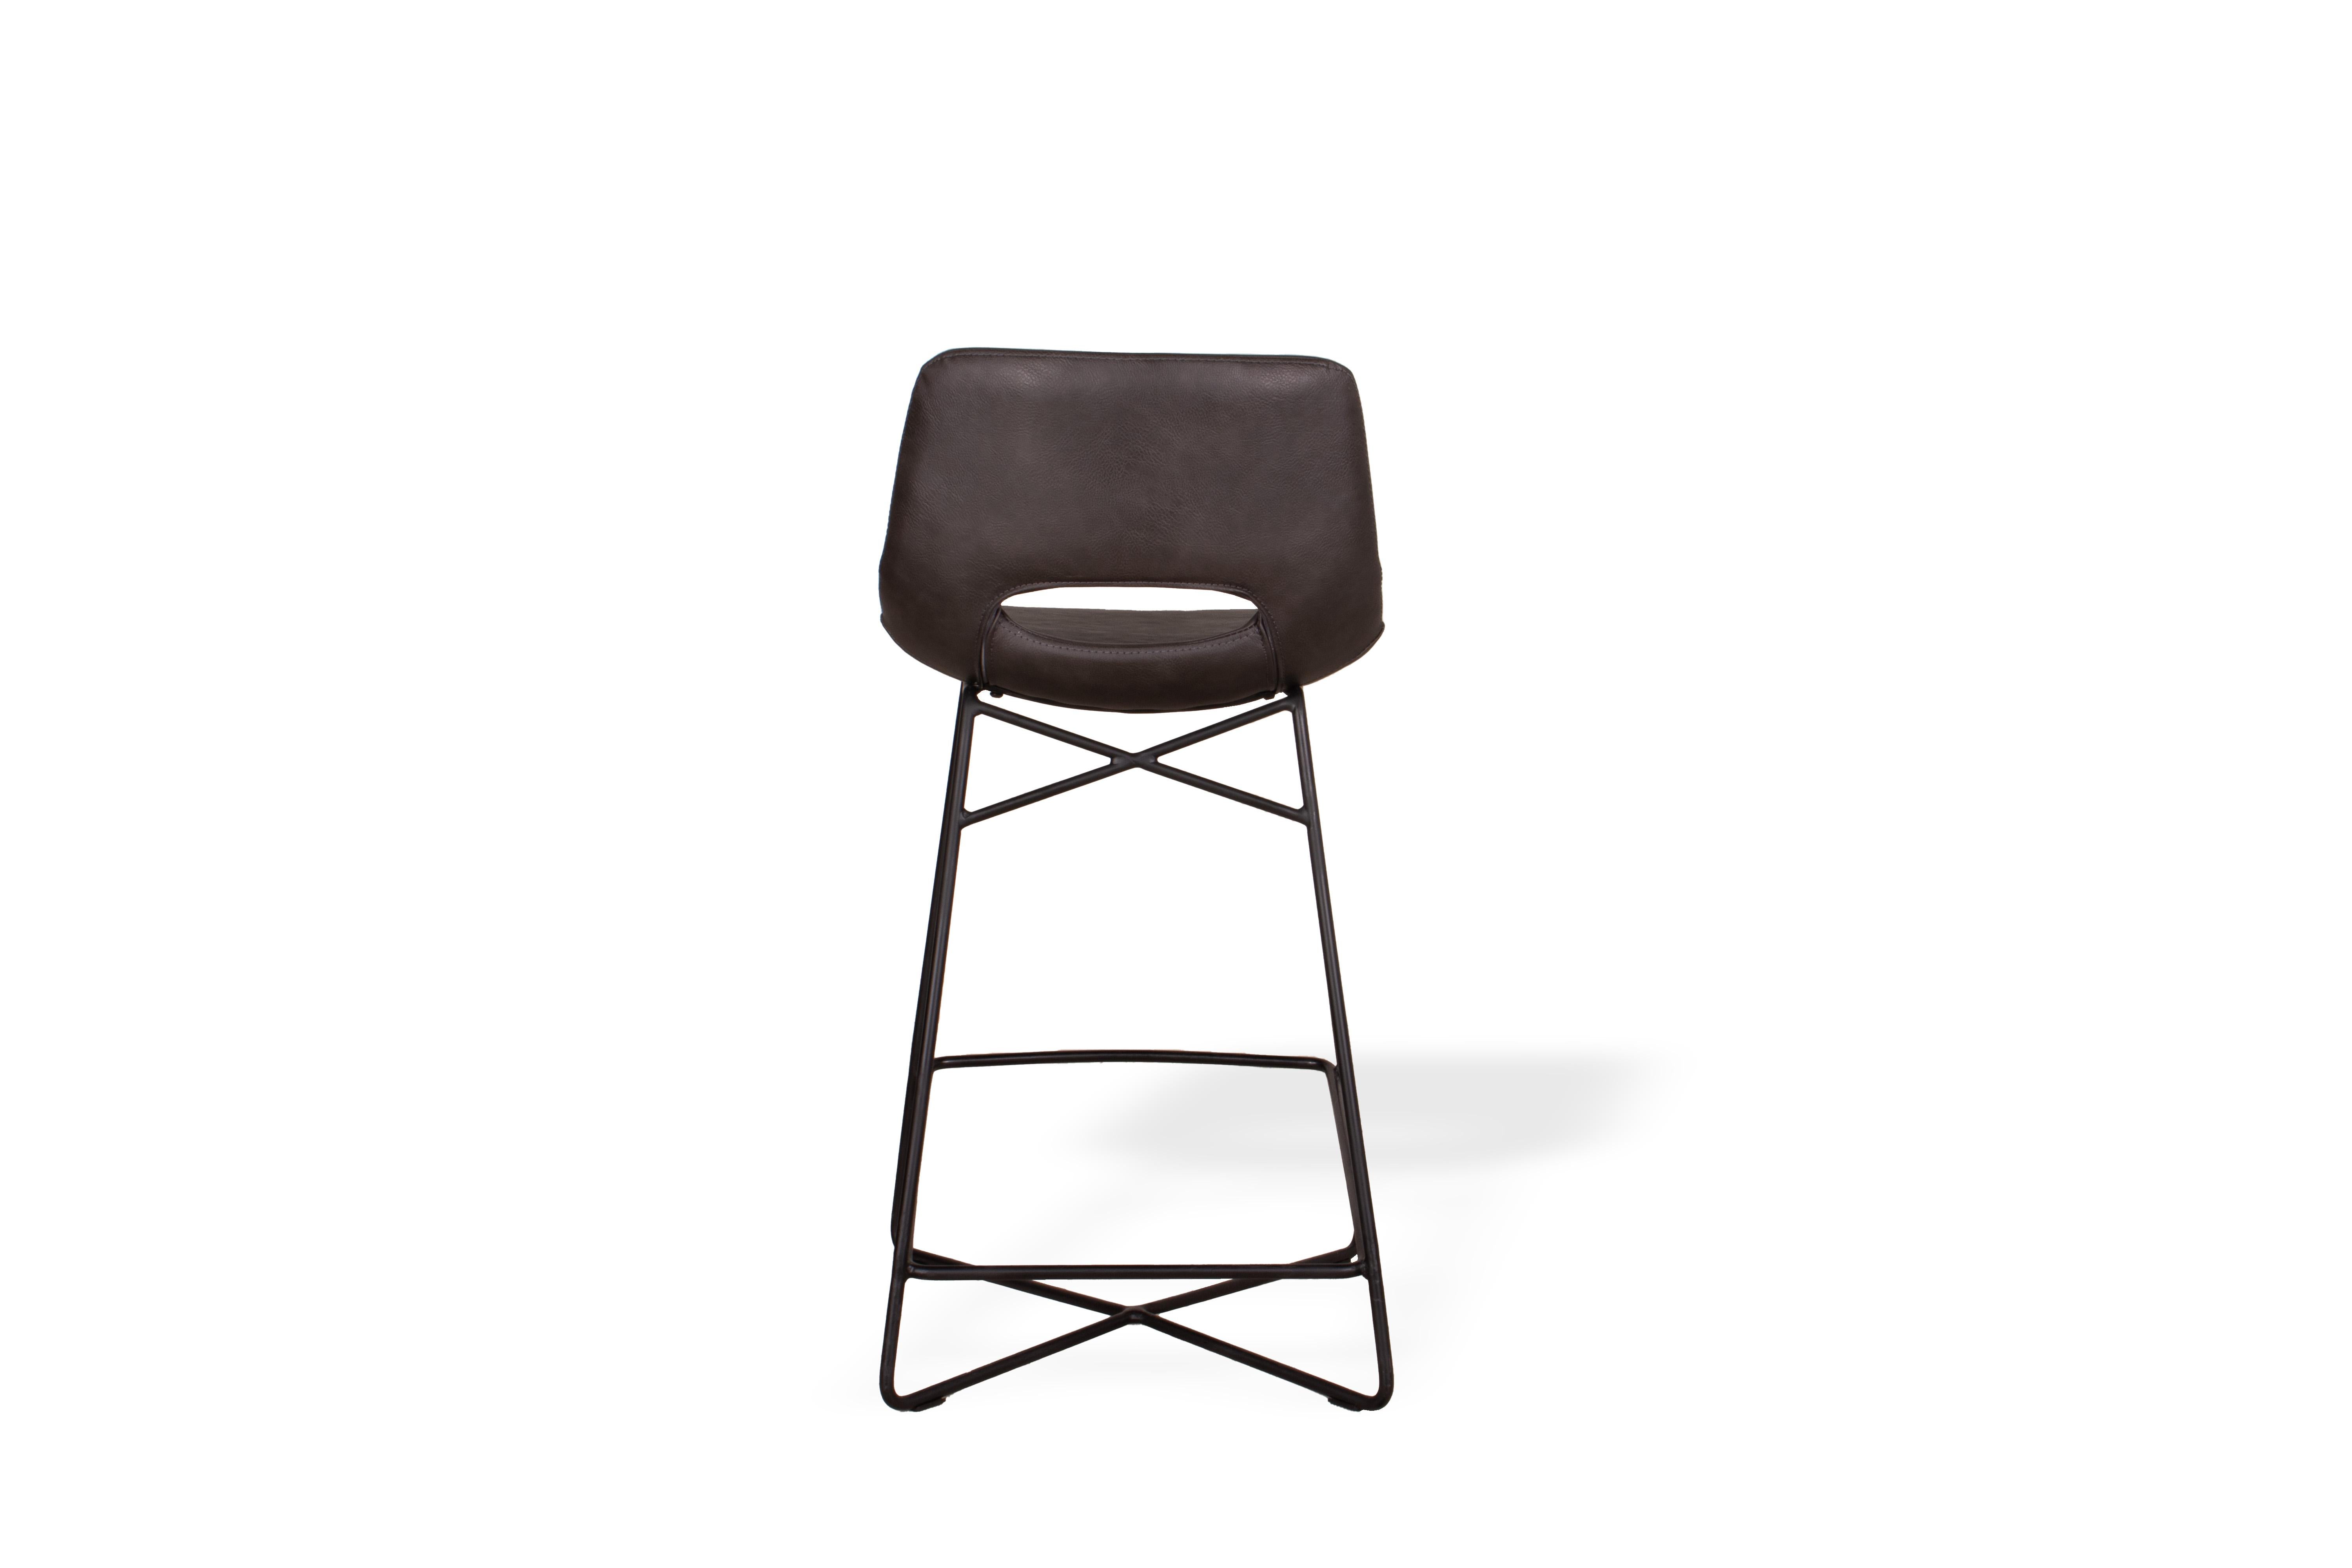 South Asian Bonded Leather and Steel Modern Bar Chair